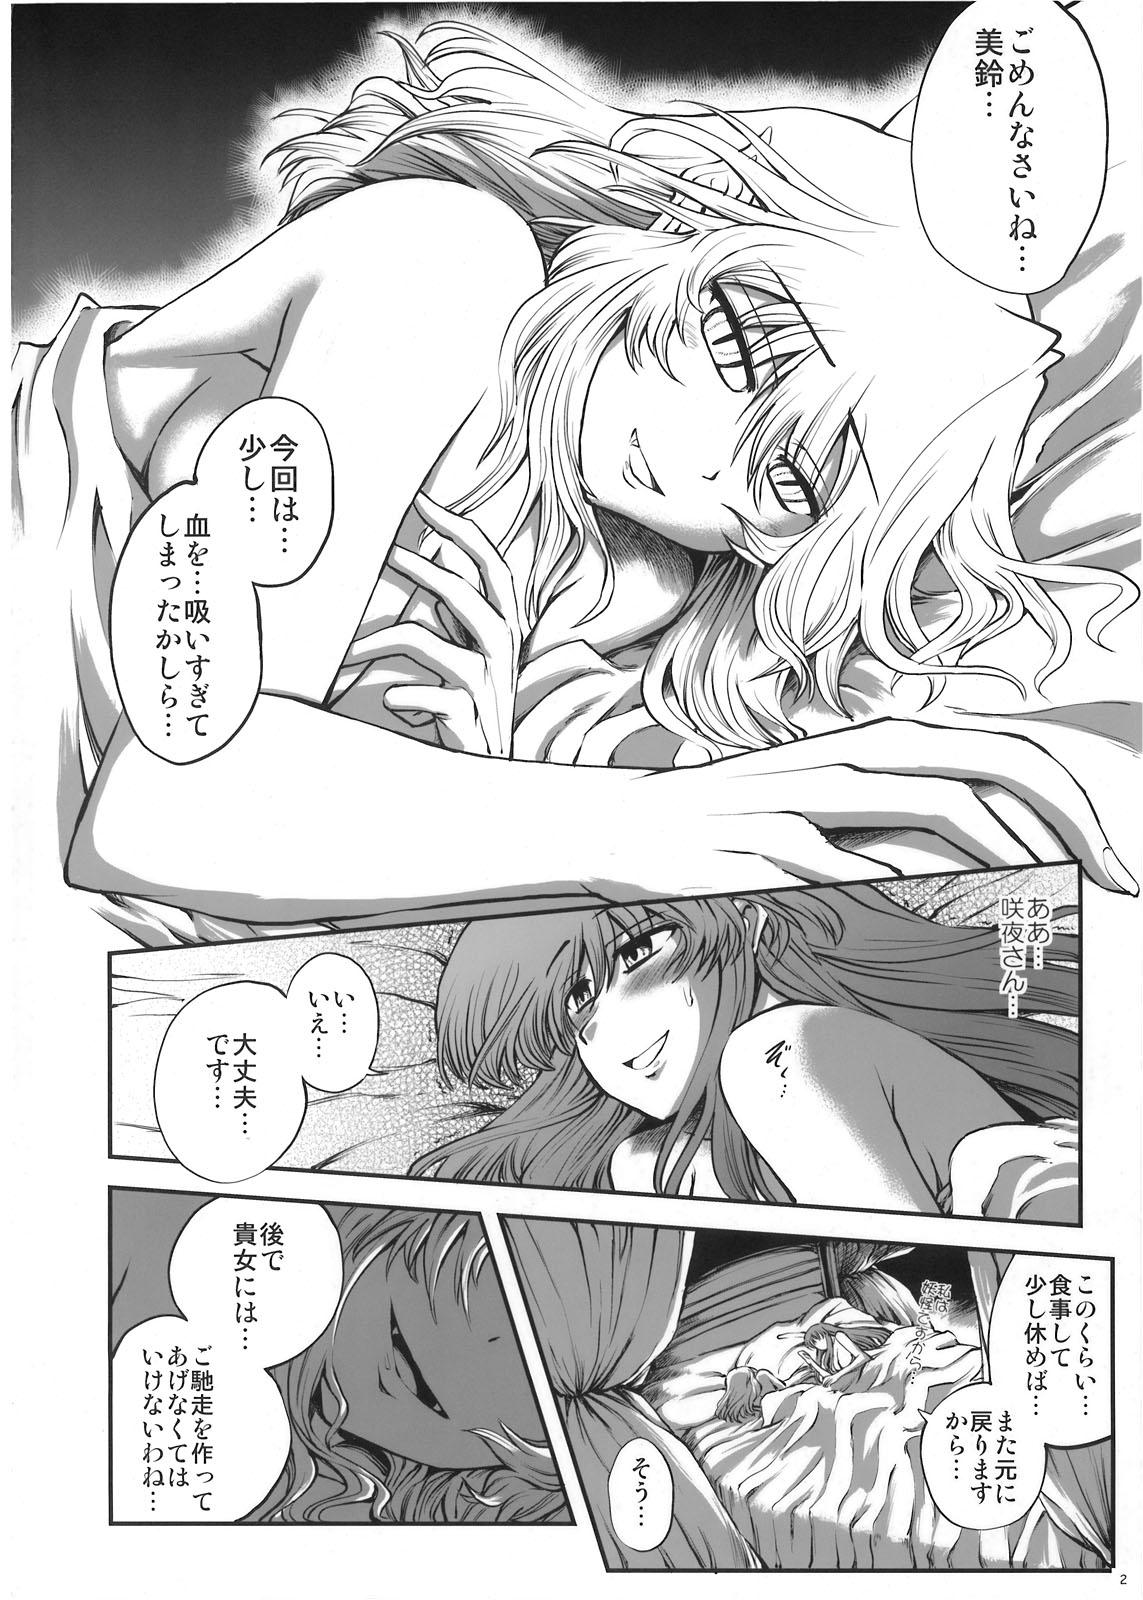 Piss Luna Dial Maid to Chi no Unmei dokei Lunatic+alpha - Touhou project Shecock - Page 3